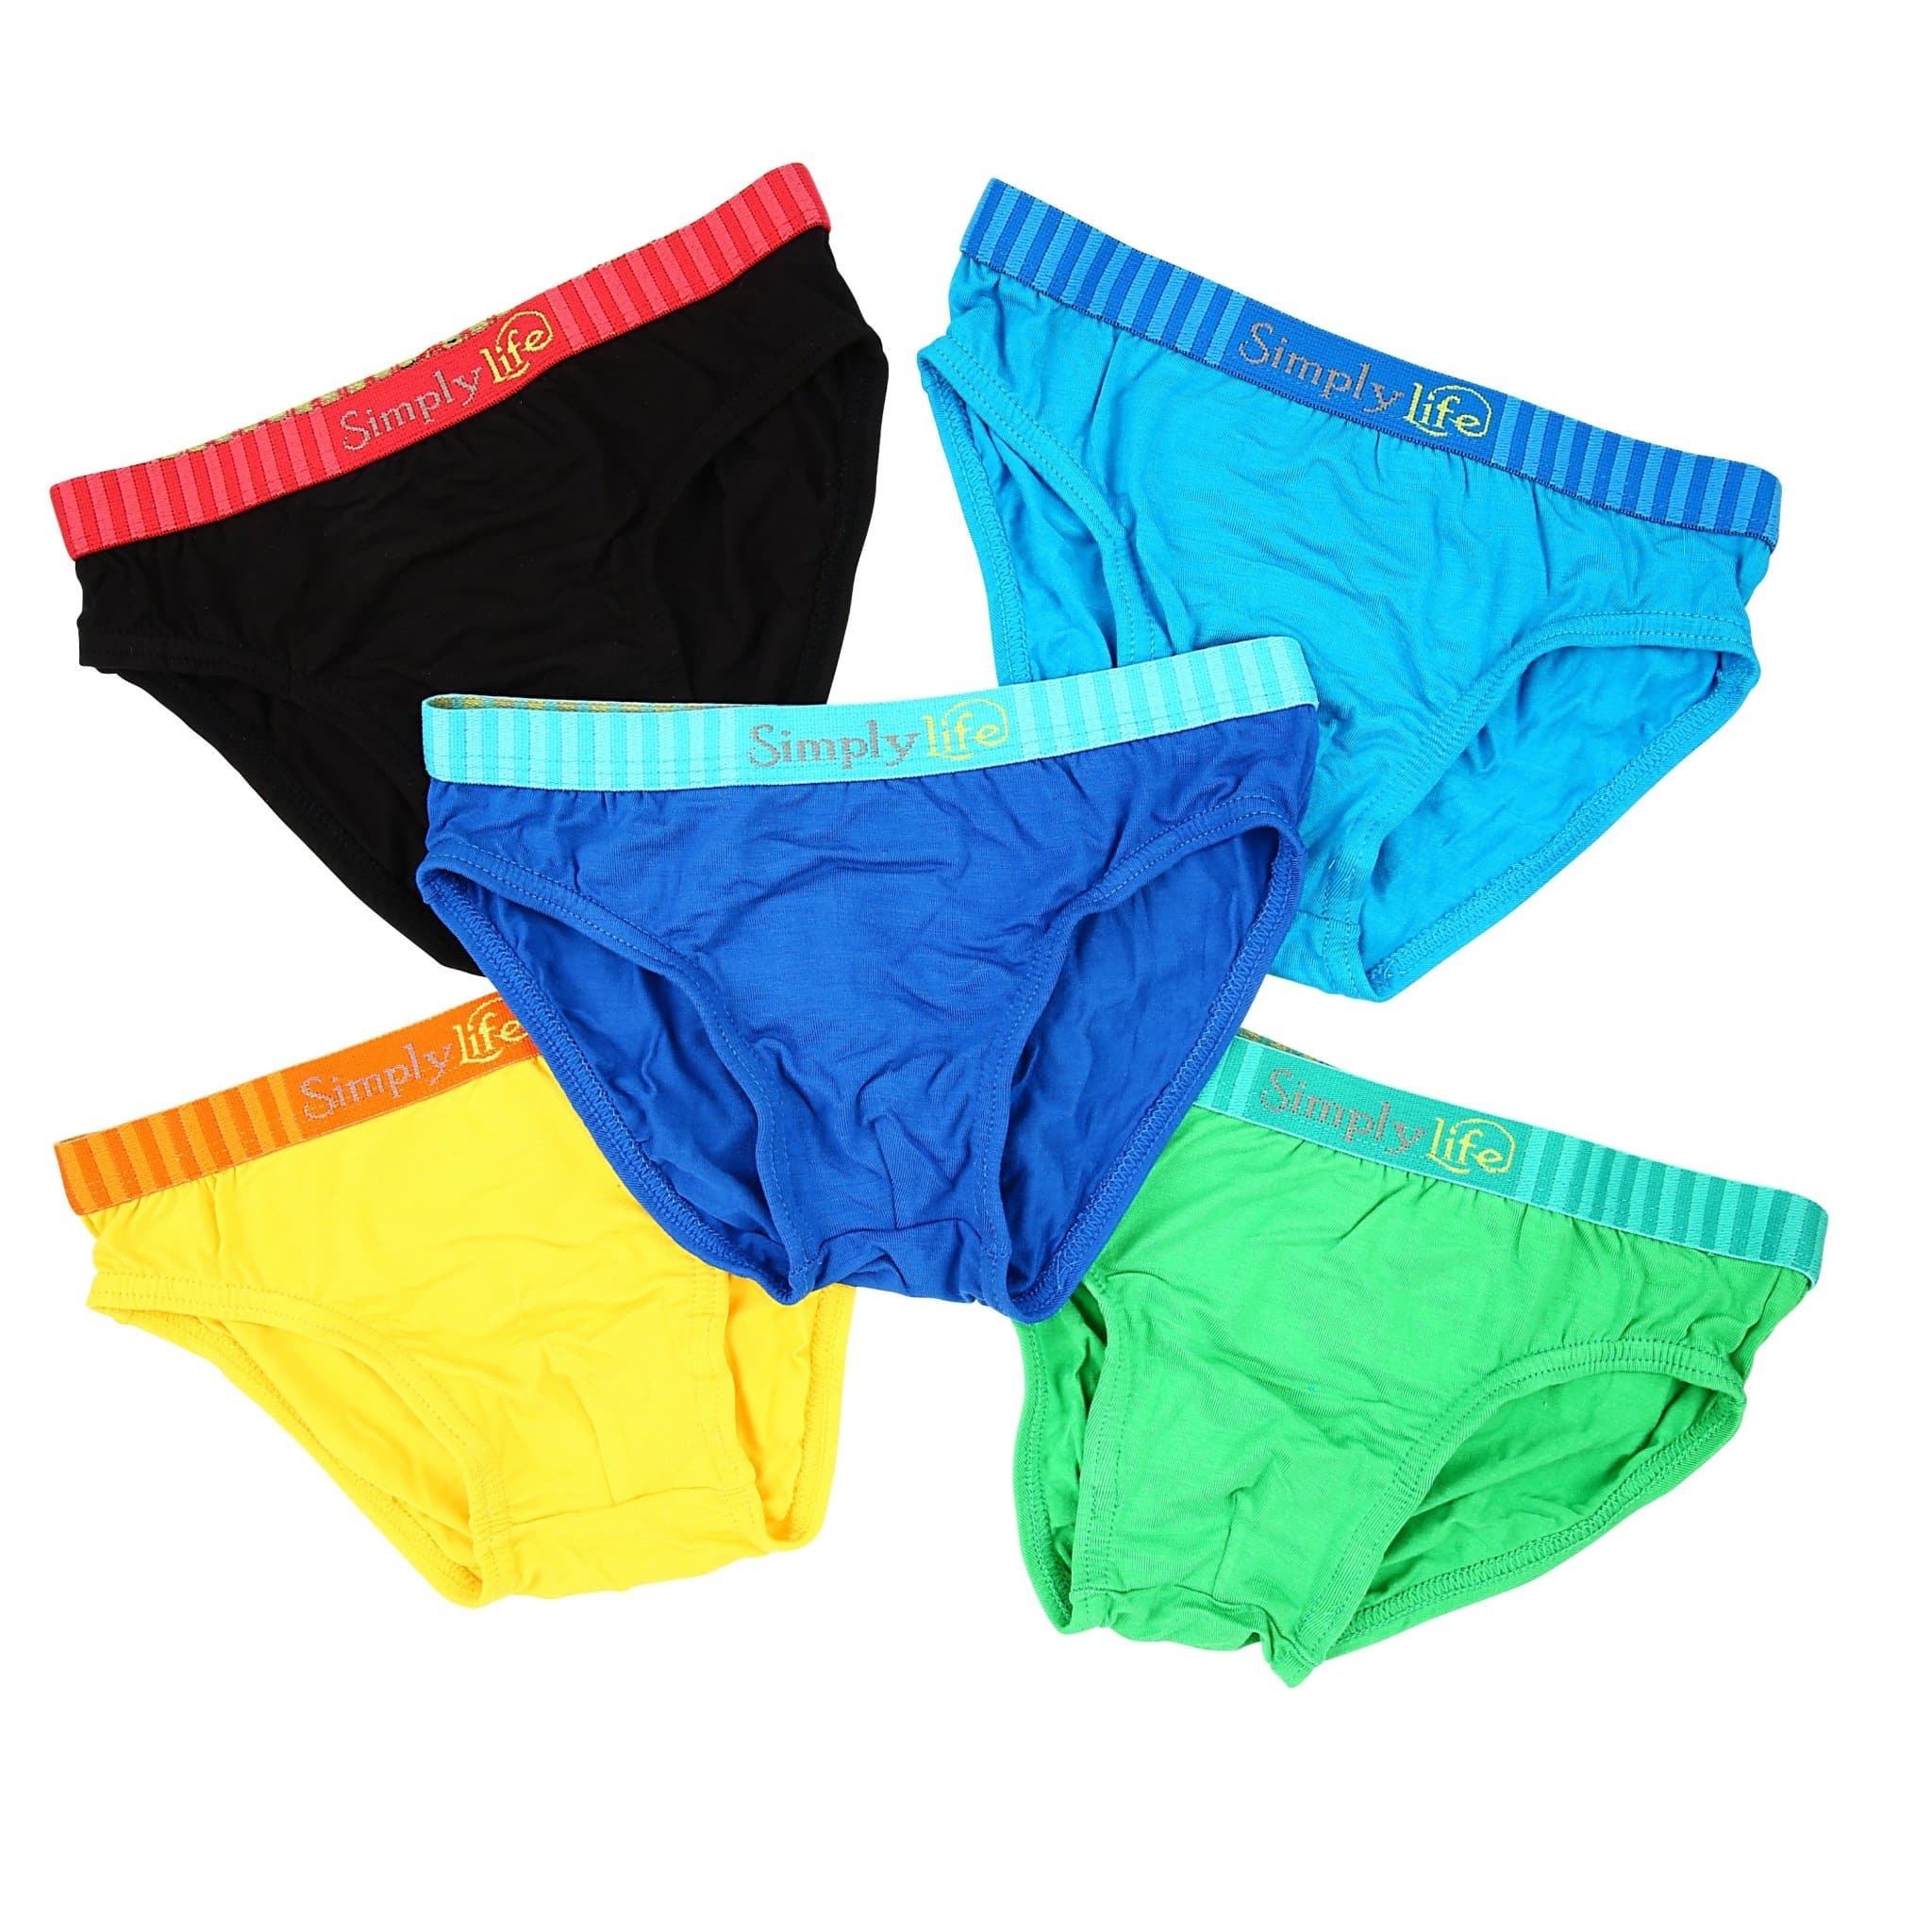 Simply Life - Bamboo - Boys Briefs (5-Pack Set)